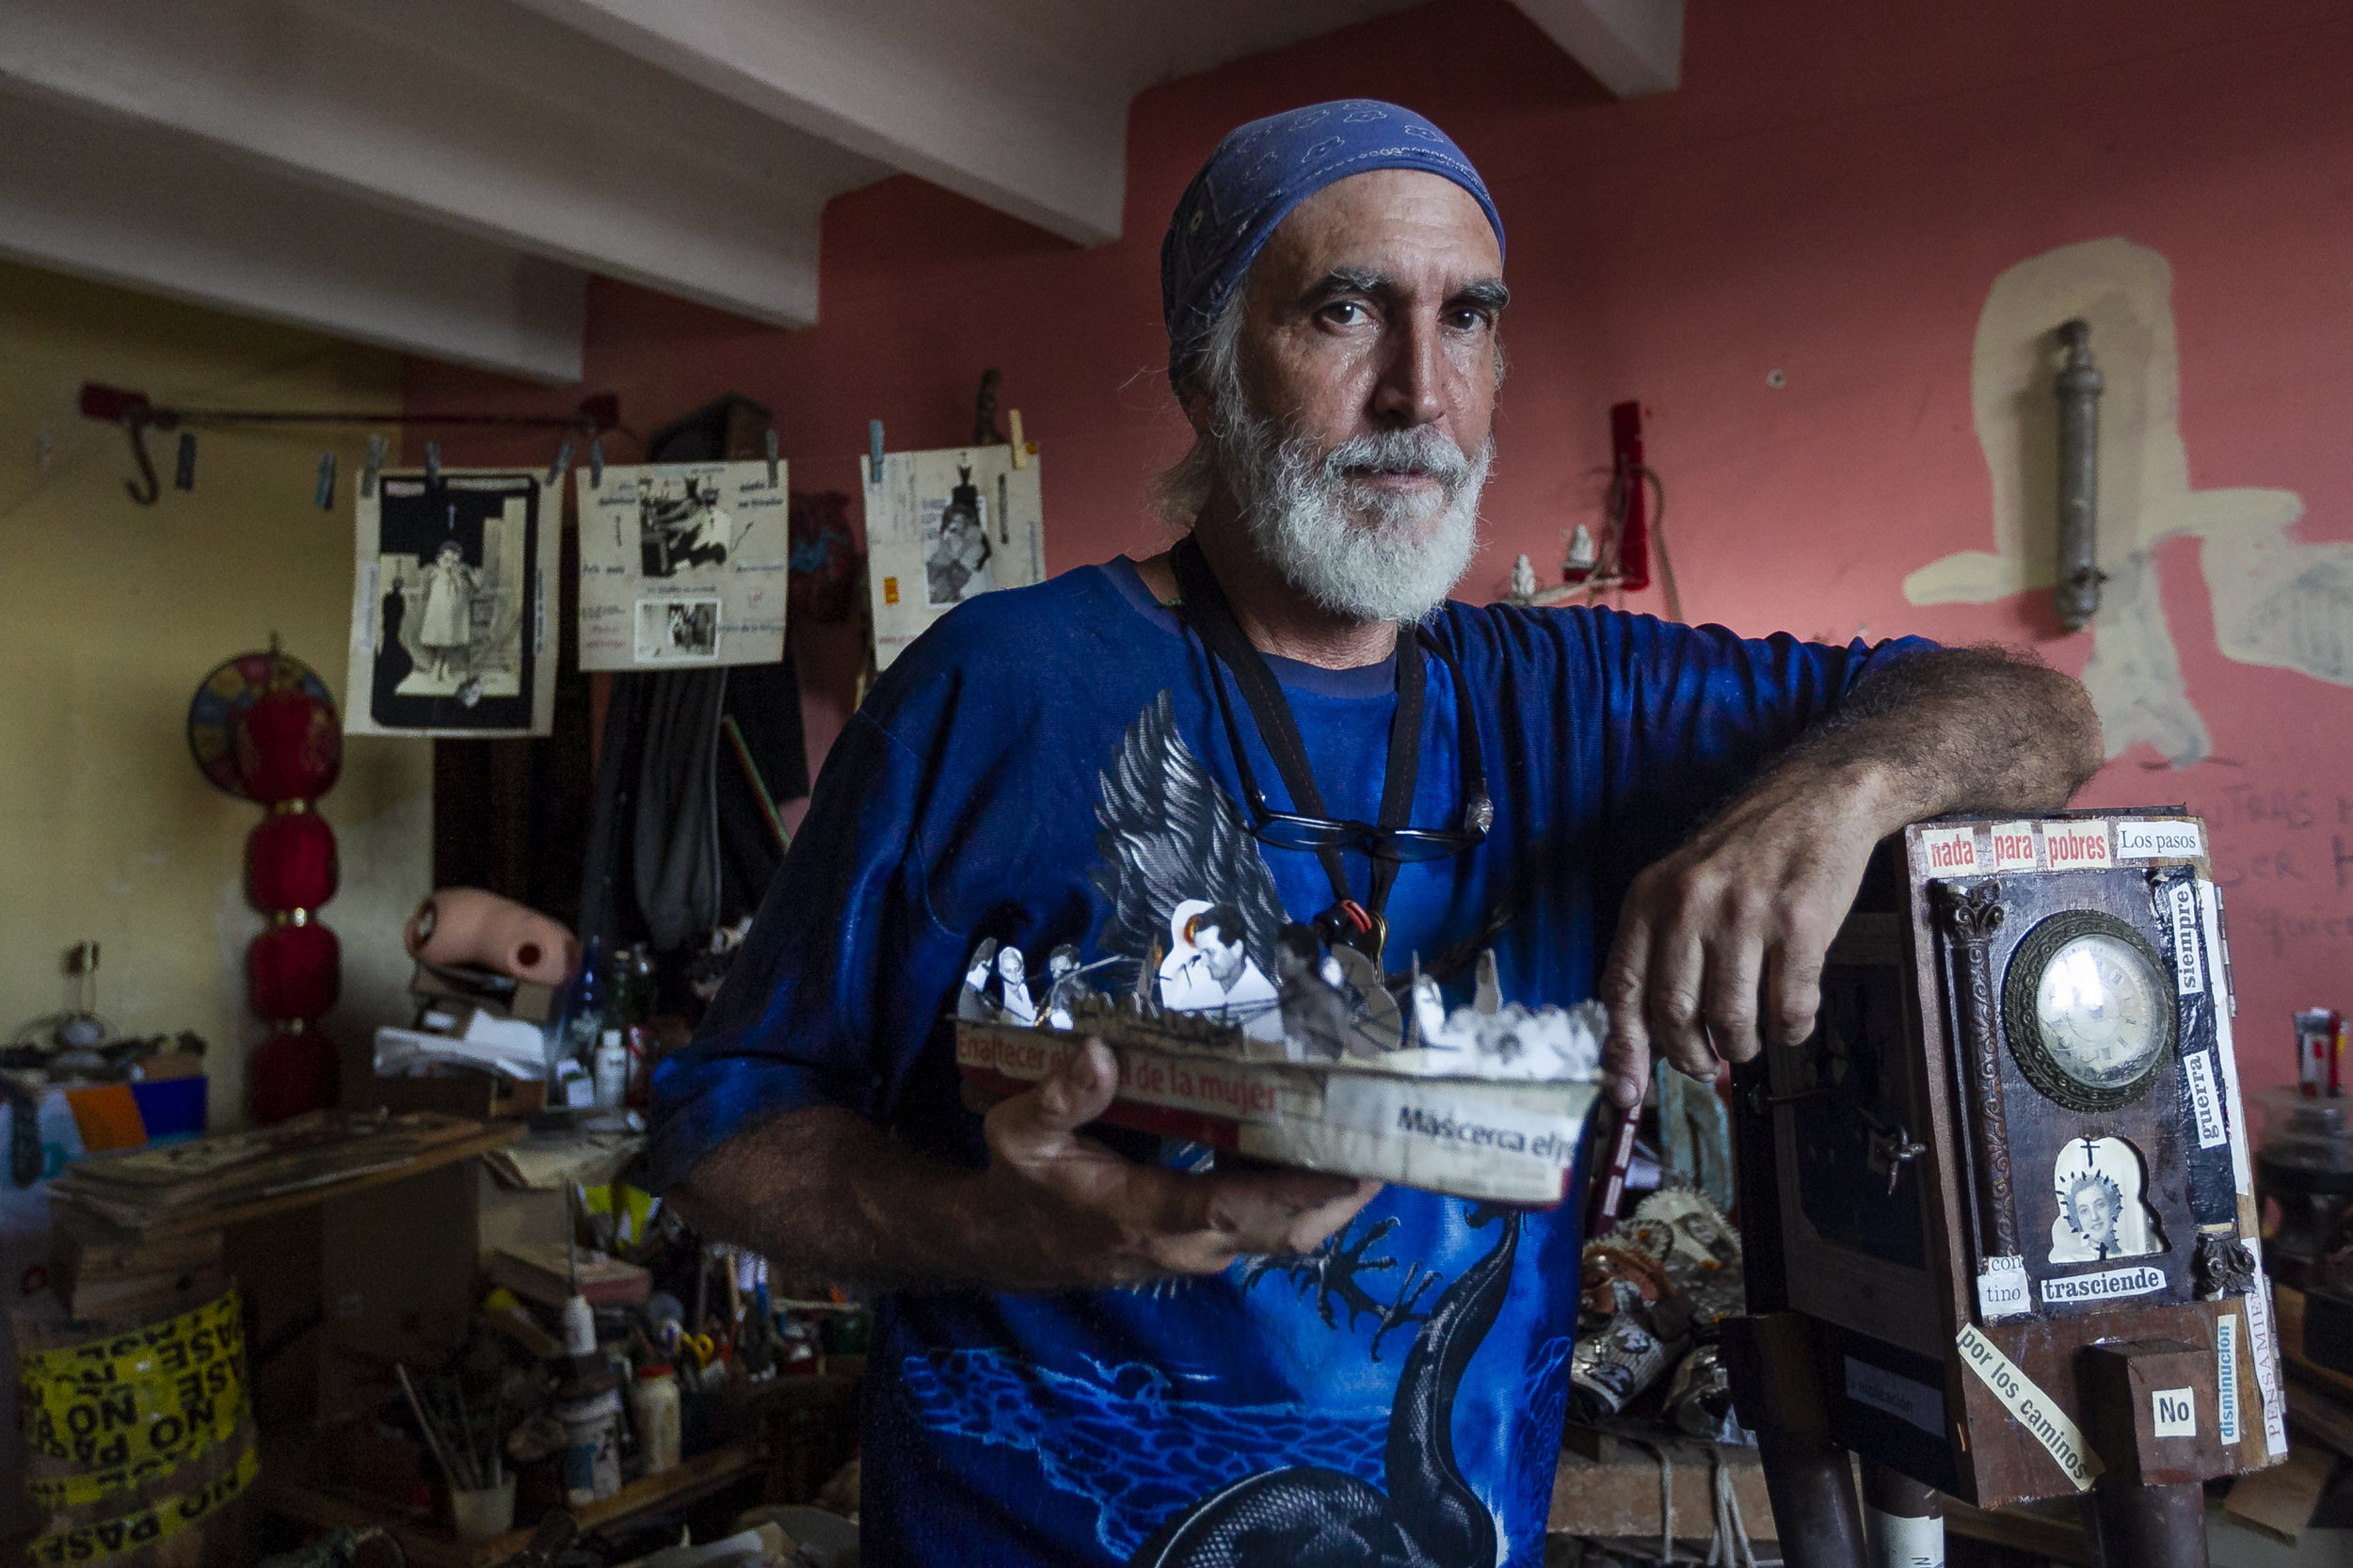  Jorge Alberto Hernandez Cadi, a Cuban outsider artist who lives in Alamar, holds a boat he created from paper and old photographs. Hernandez is known as "El Buso" (the diver) because he scavenges through the trash to find objects for his art. 